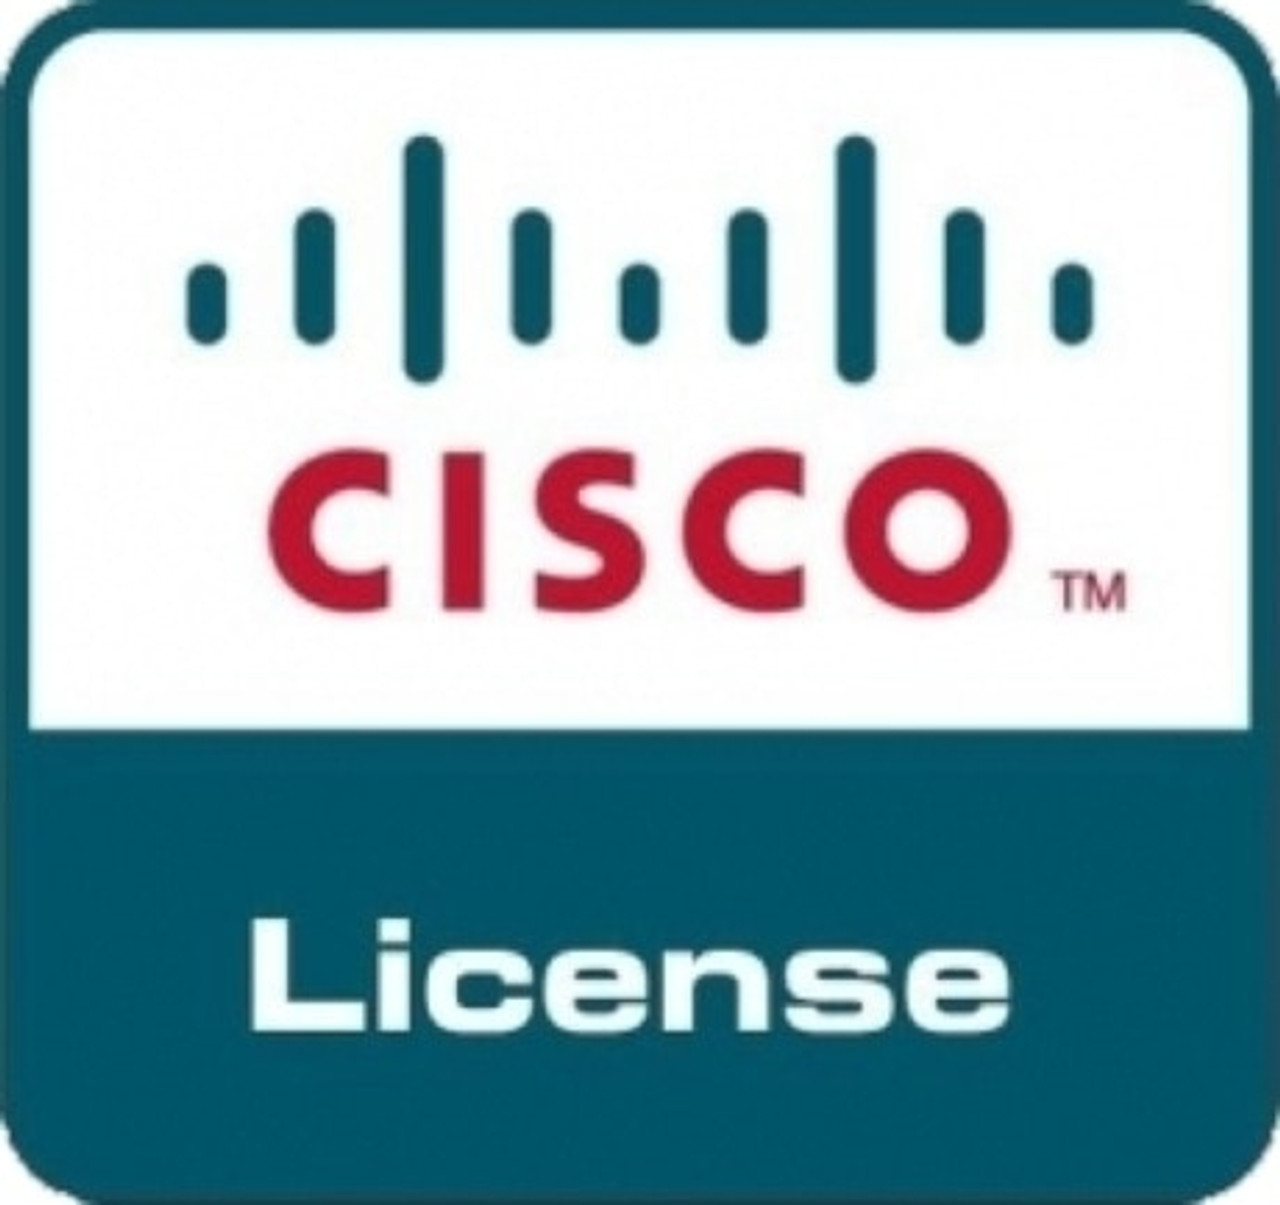 Cisco 3 Years Solution Support 24X7X4OS (CON-3SC4P-XXX)